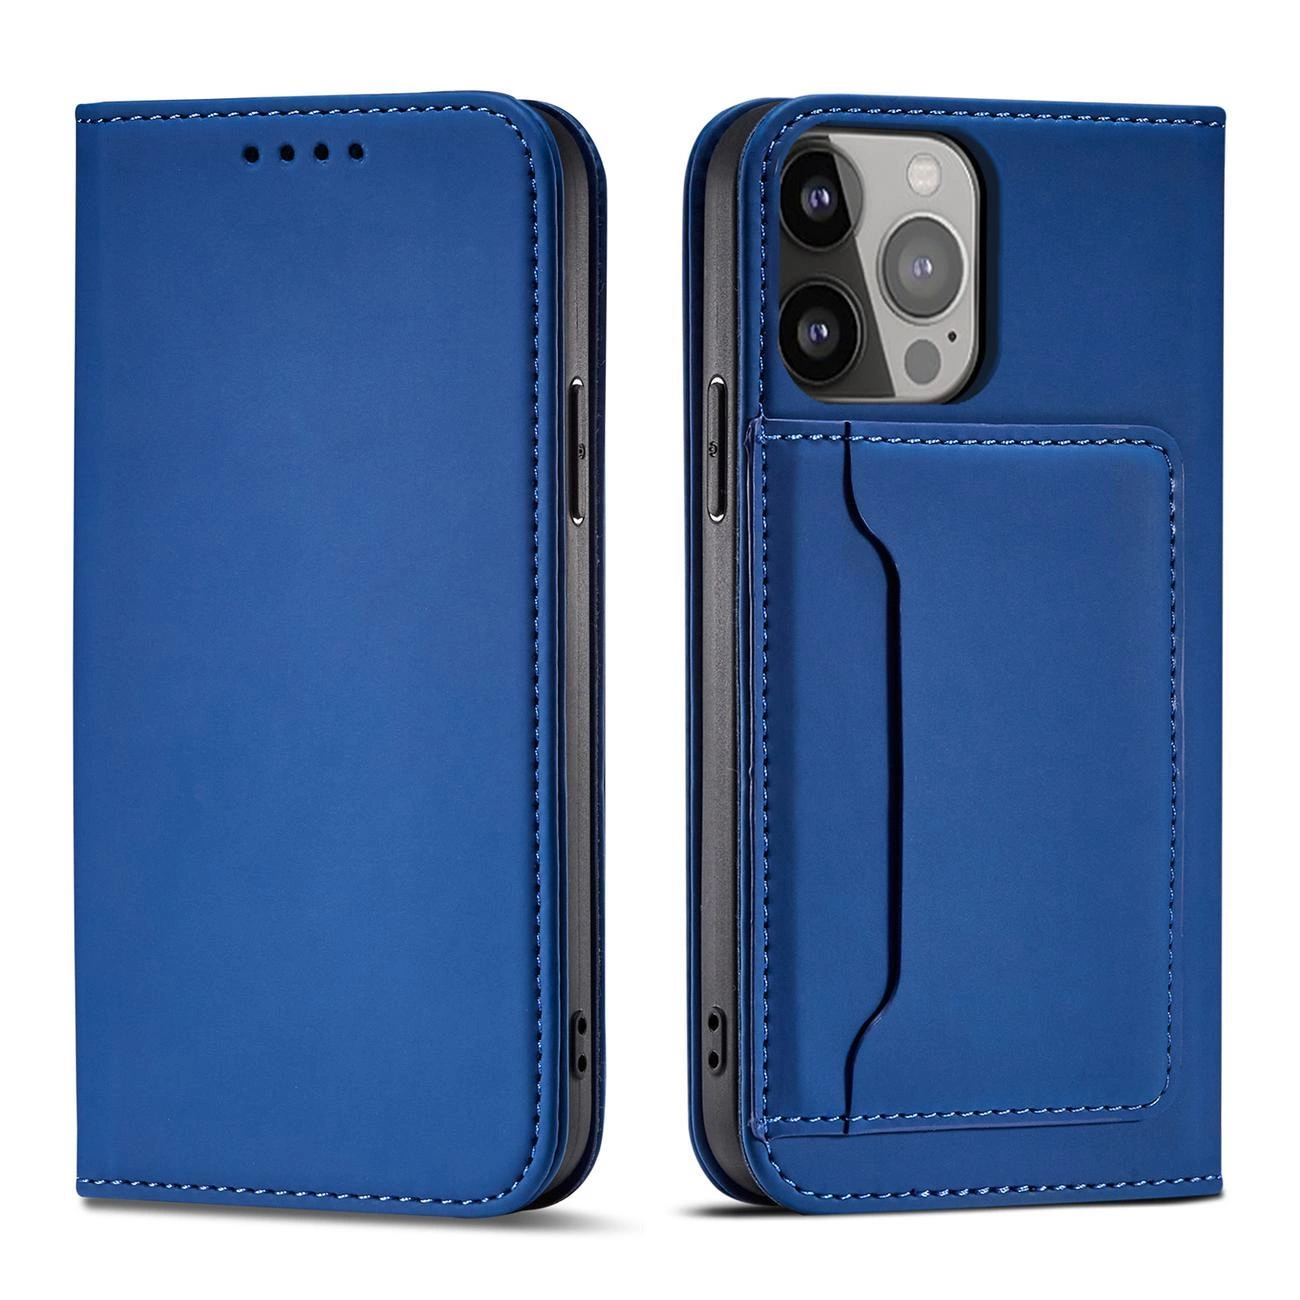 Hurtel Magnet Card Case iPhone 14 Pro Max flip cover wallet stand blue